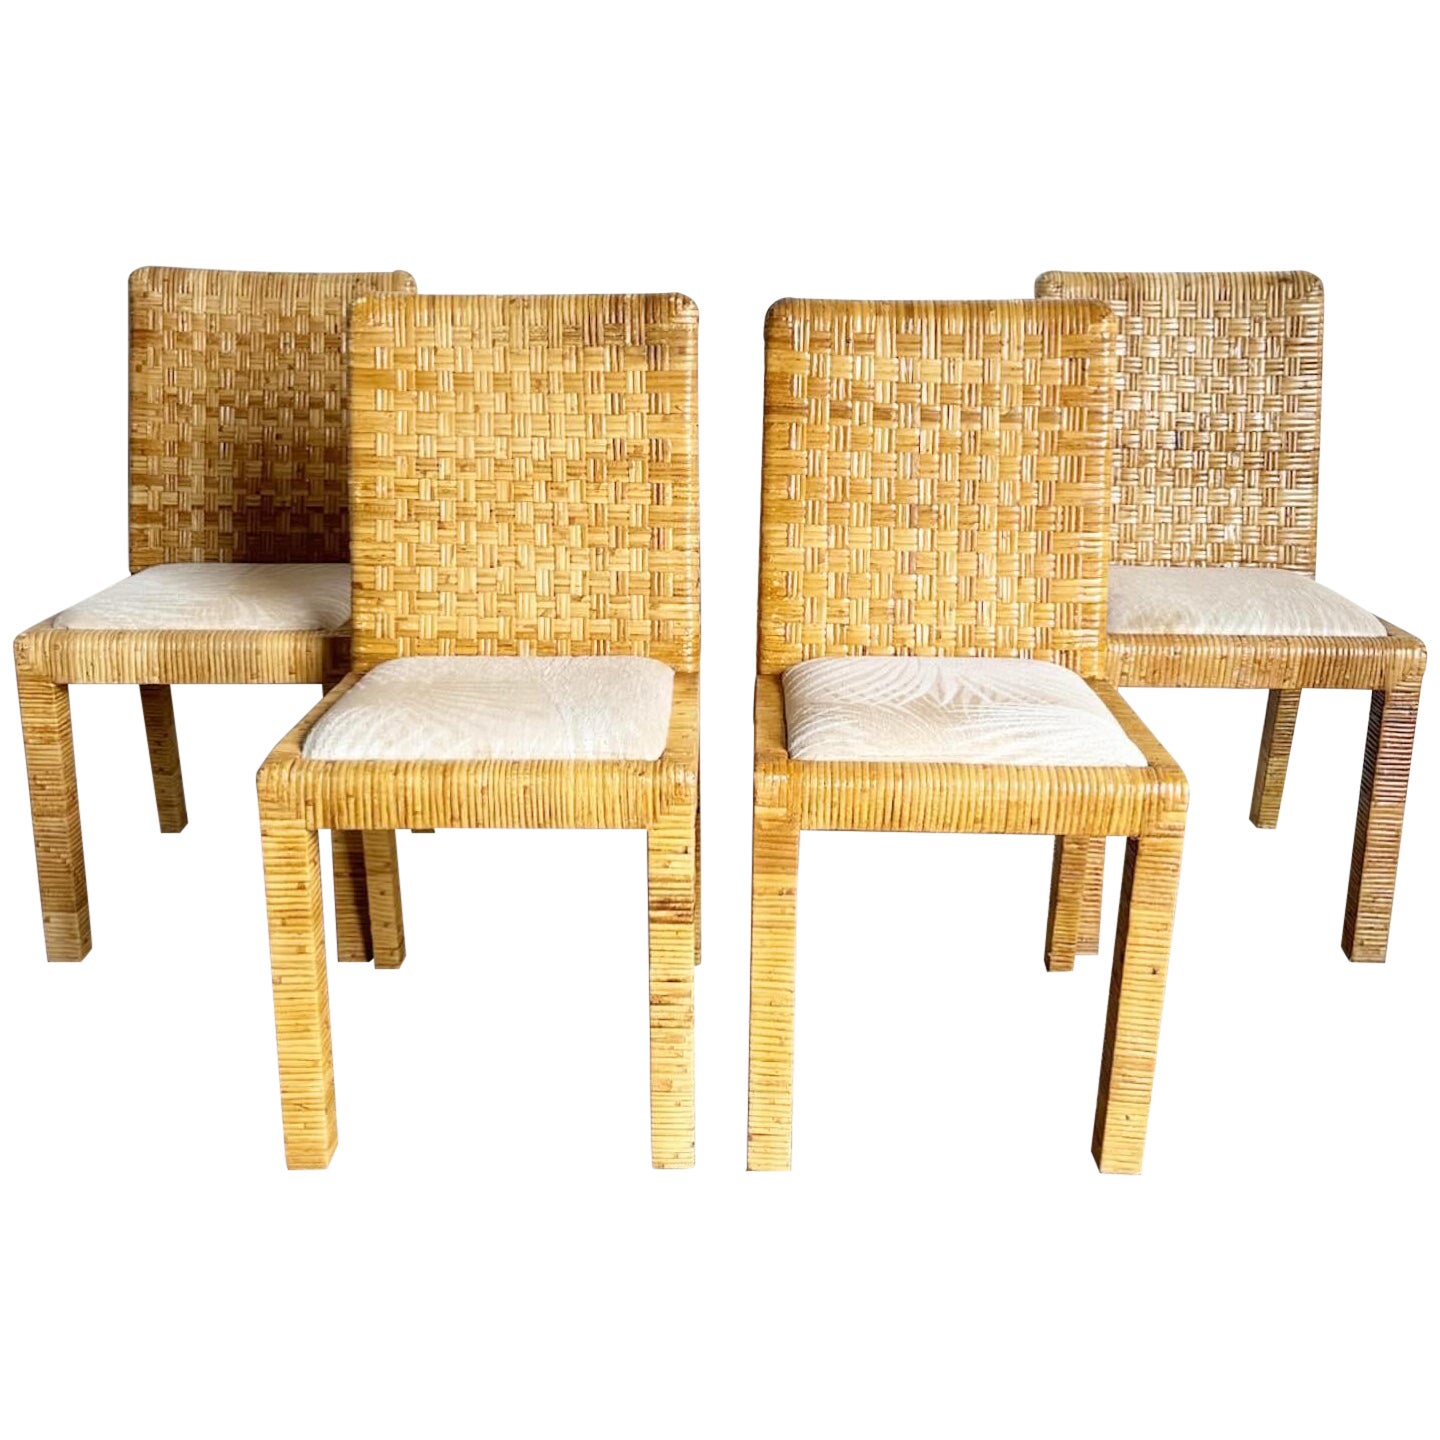 Boho Chic Rattan and Wicker Parsons Dining Chairs - Set of 4 For Sale